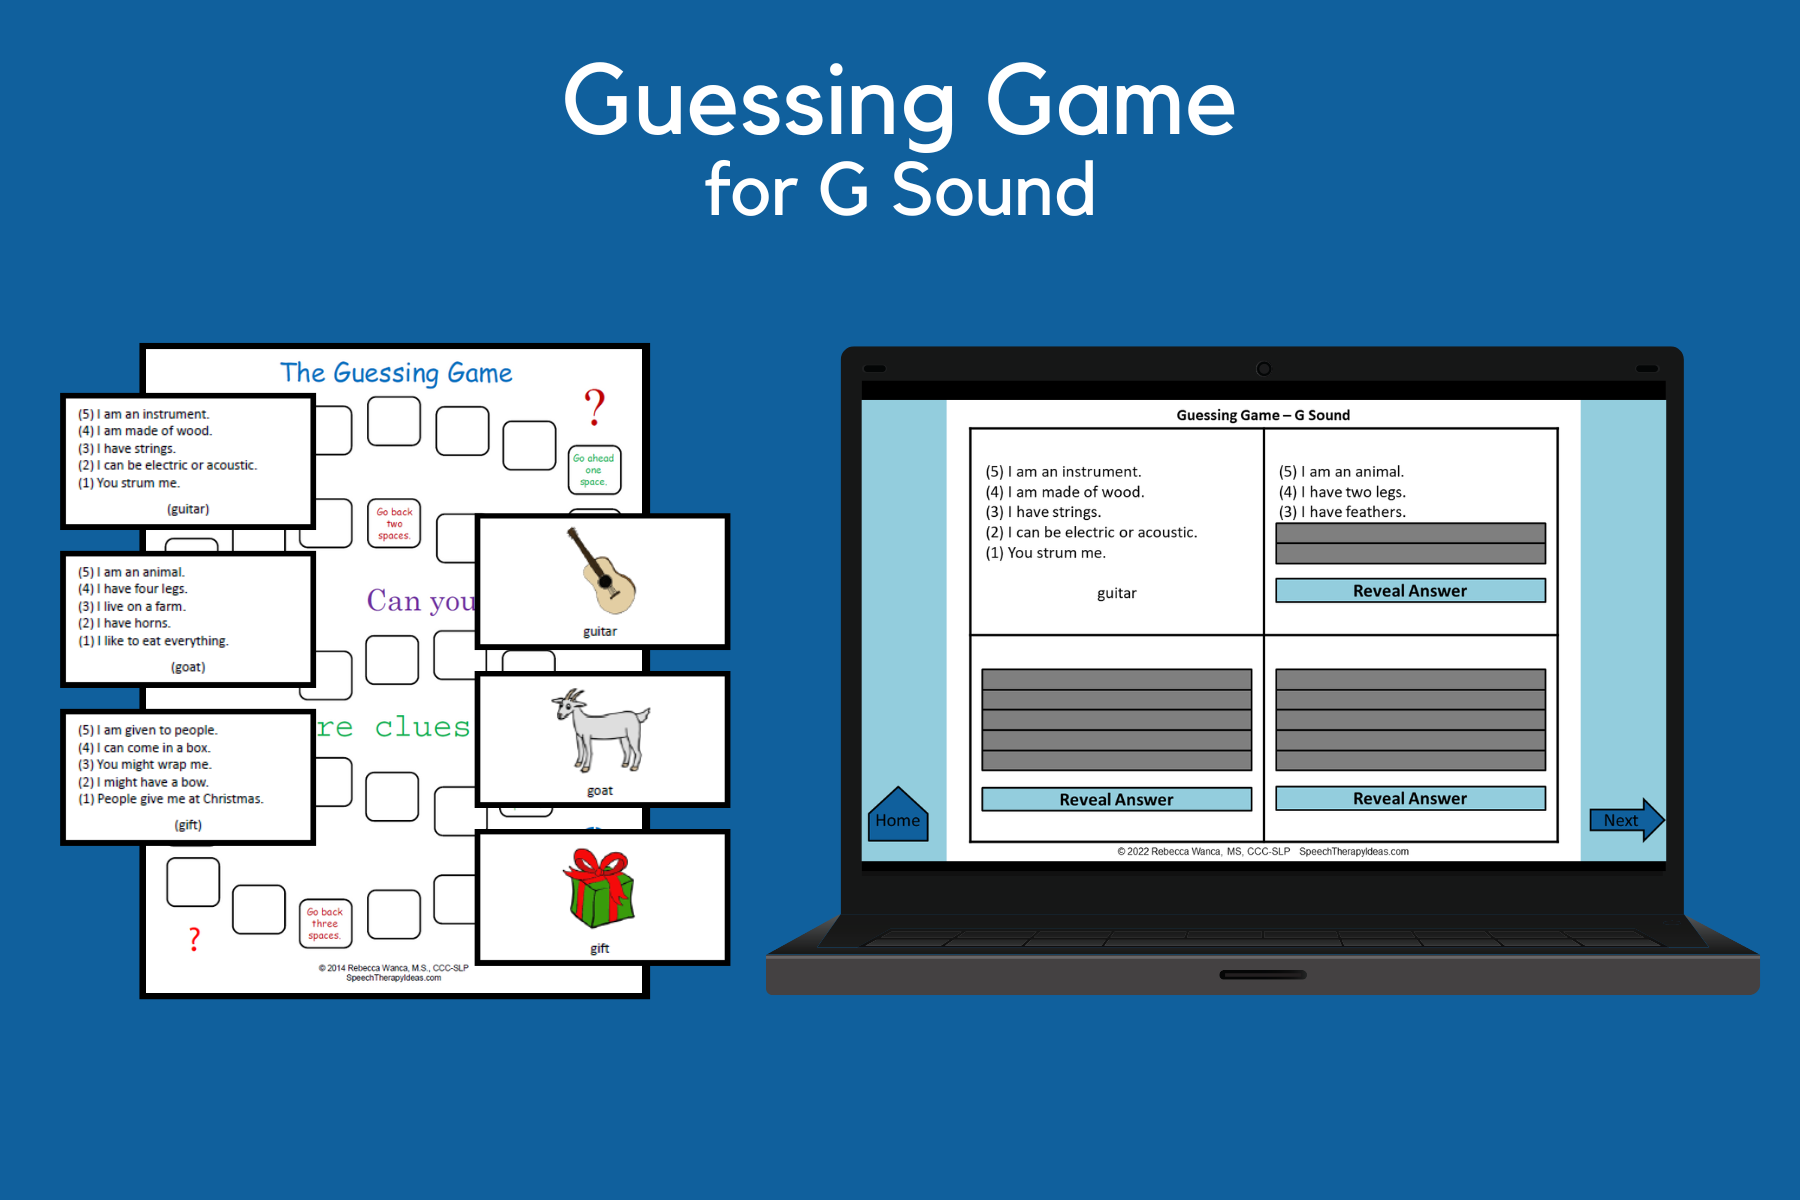 Guessing Game – G Sound